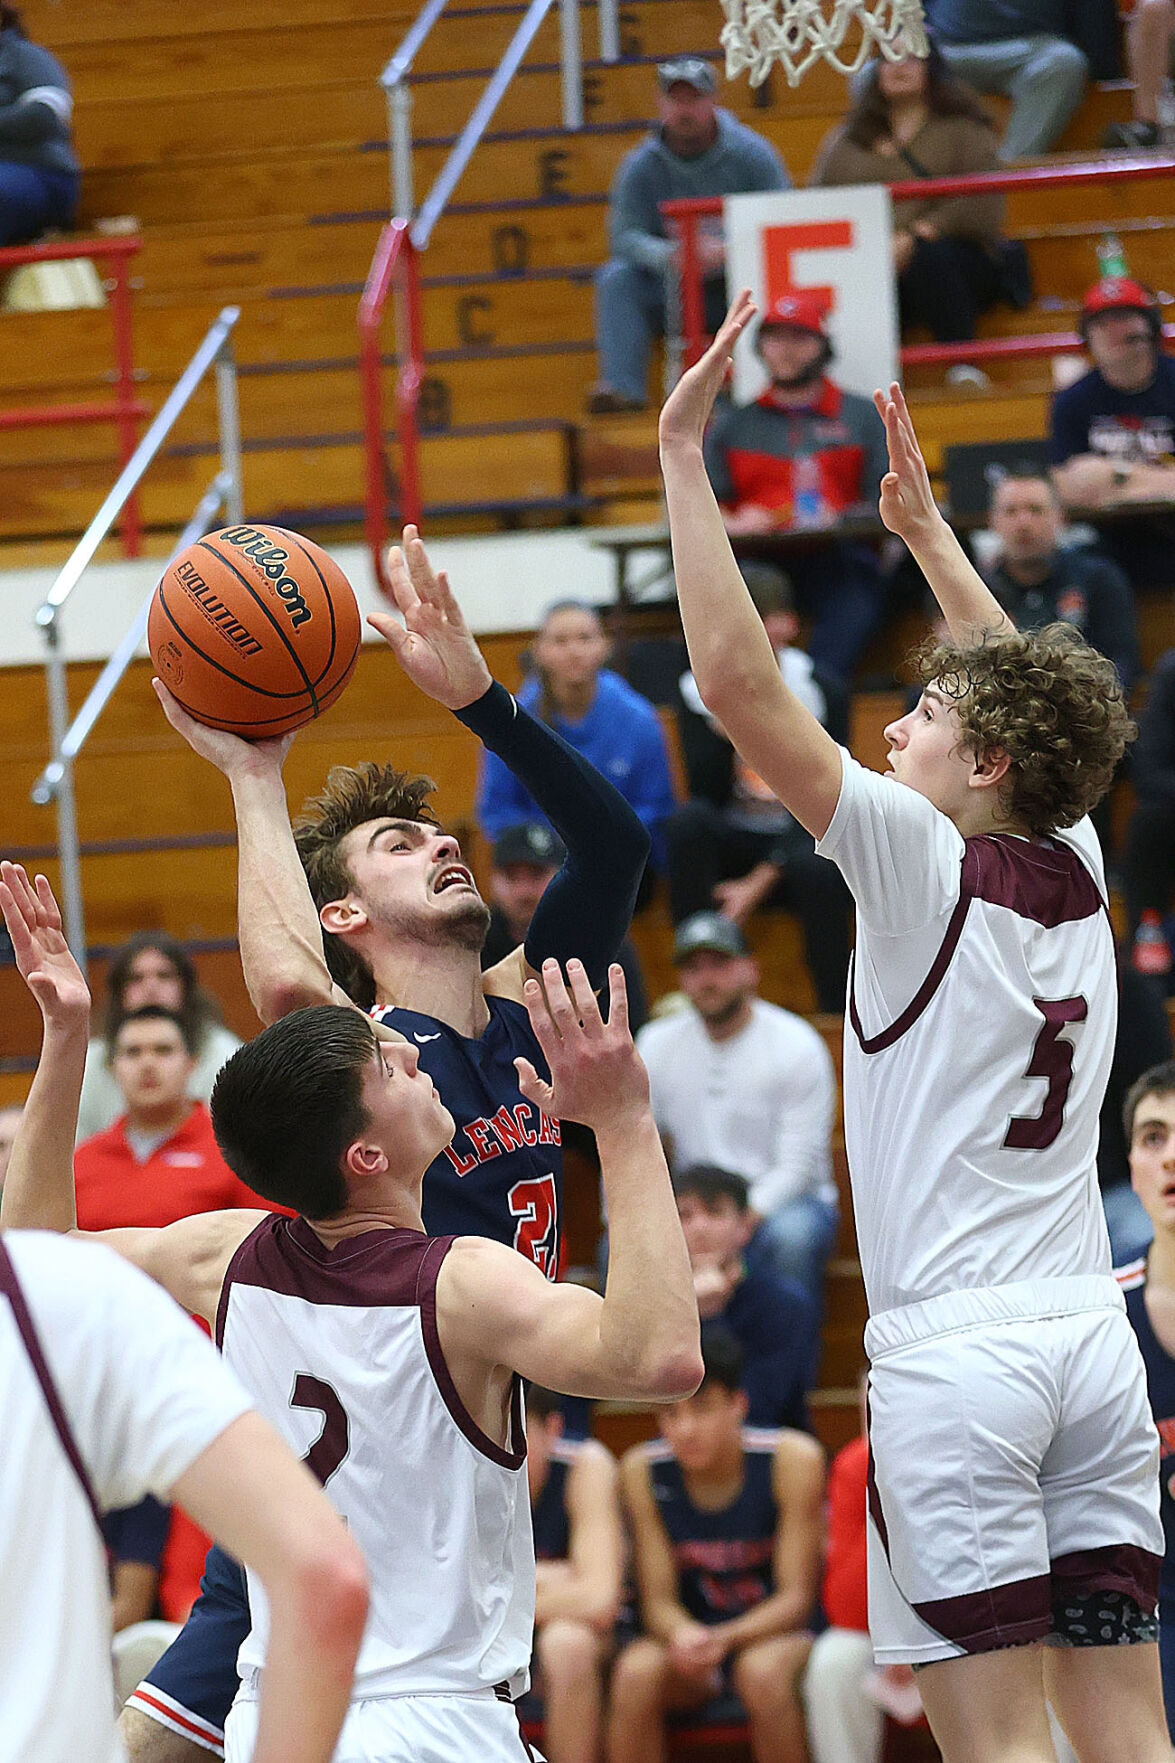 Lewis Cass Kings Defeat Winamac Warriors 50-48 with LJ Hillis Leading the Way